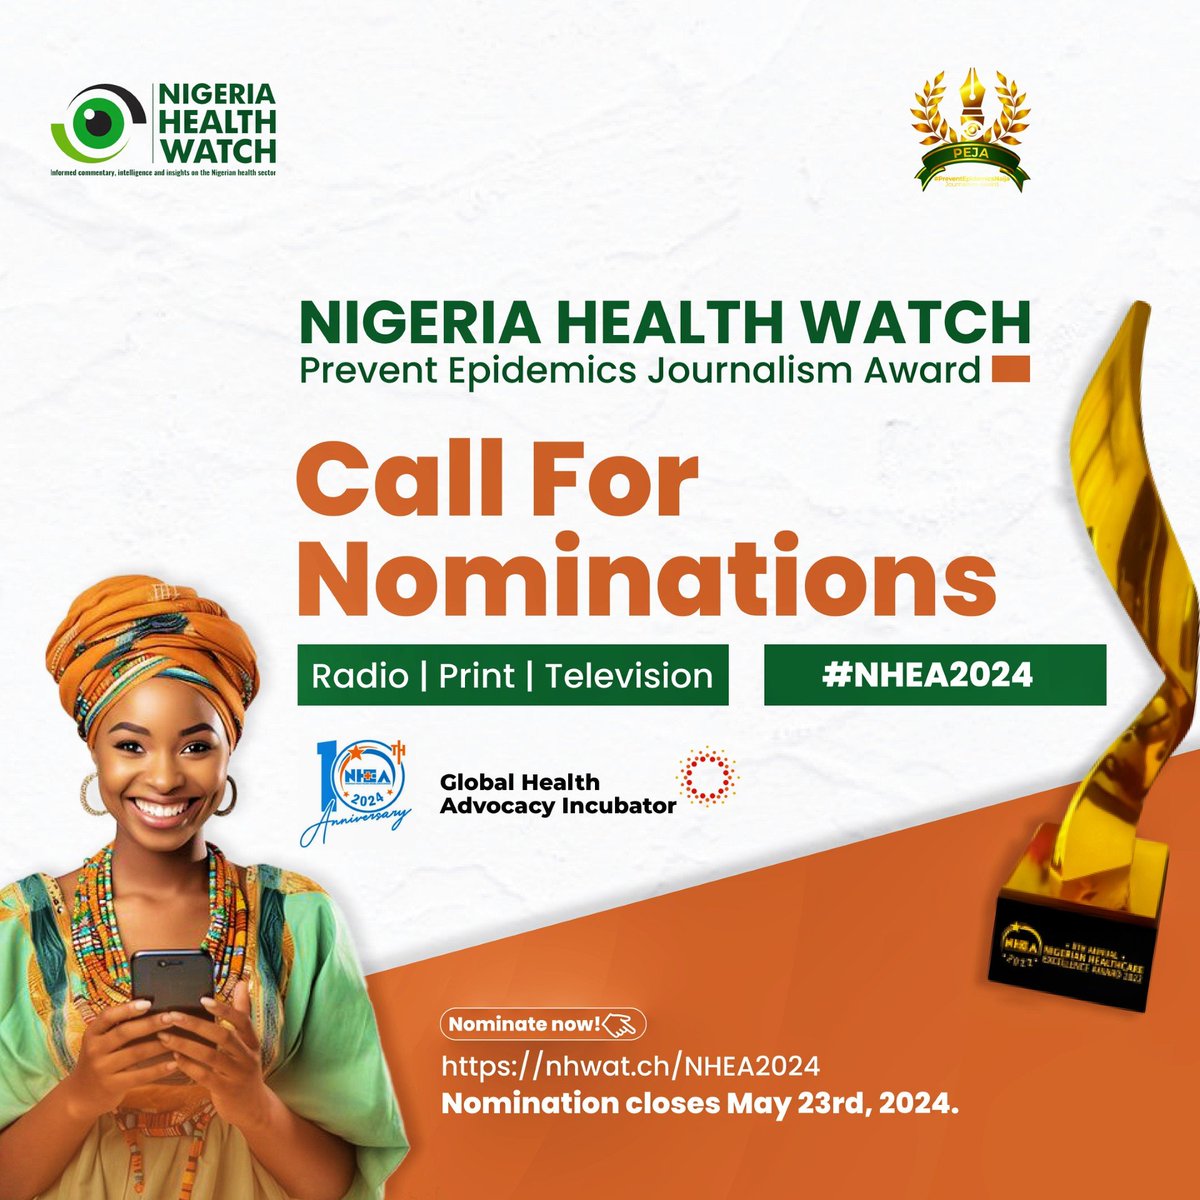 Health journalists are key players in epidemic preparedness & response in Nigeria. We celebrate them annually through the #PEJA. It is that time of the year again & this edition promises to be spectacular. Submit your nomination to win a category. Details nhwat.ch/3OVtRZW